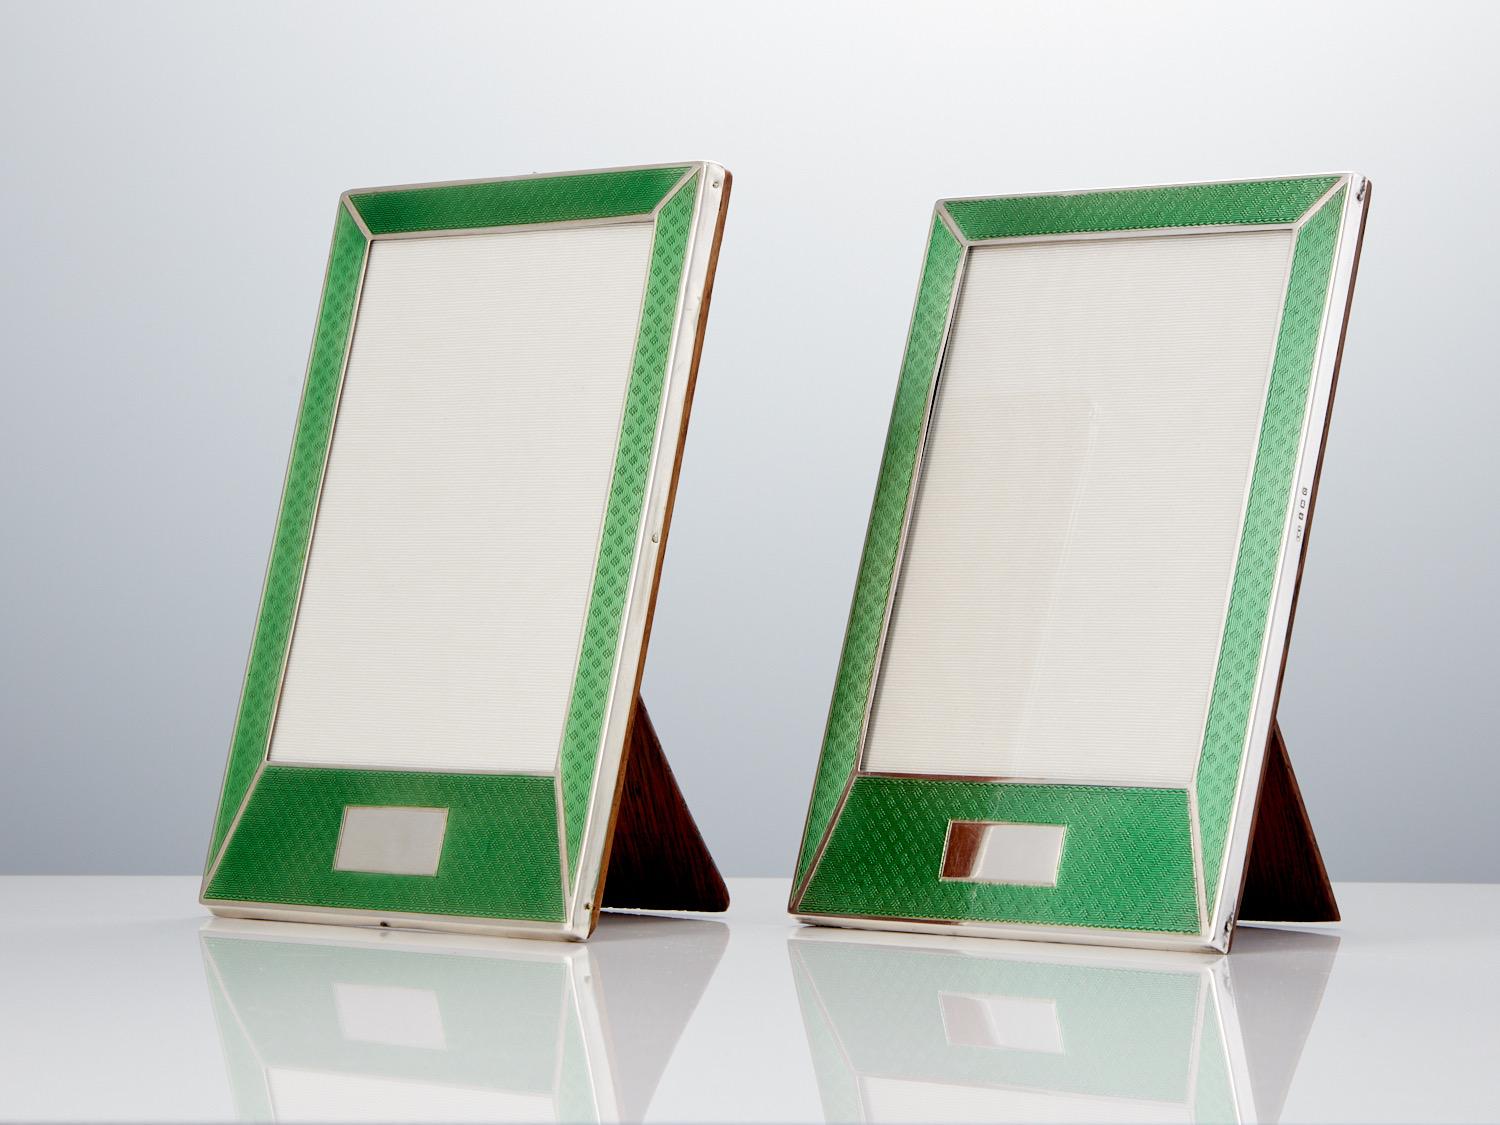 These beautiful English silver and guilloche enamel photo frames are in excellent condition and they retain their stunning translucent quality.
The backs are in original condition, there is a difference in easel supports but both are English